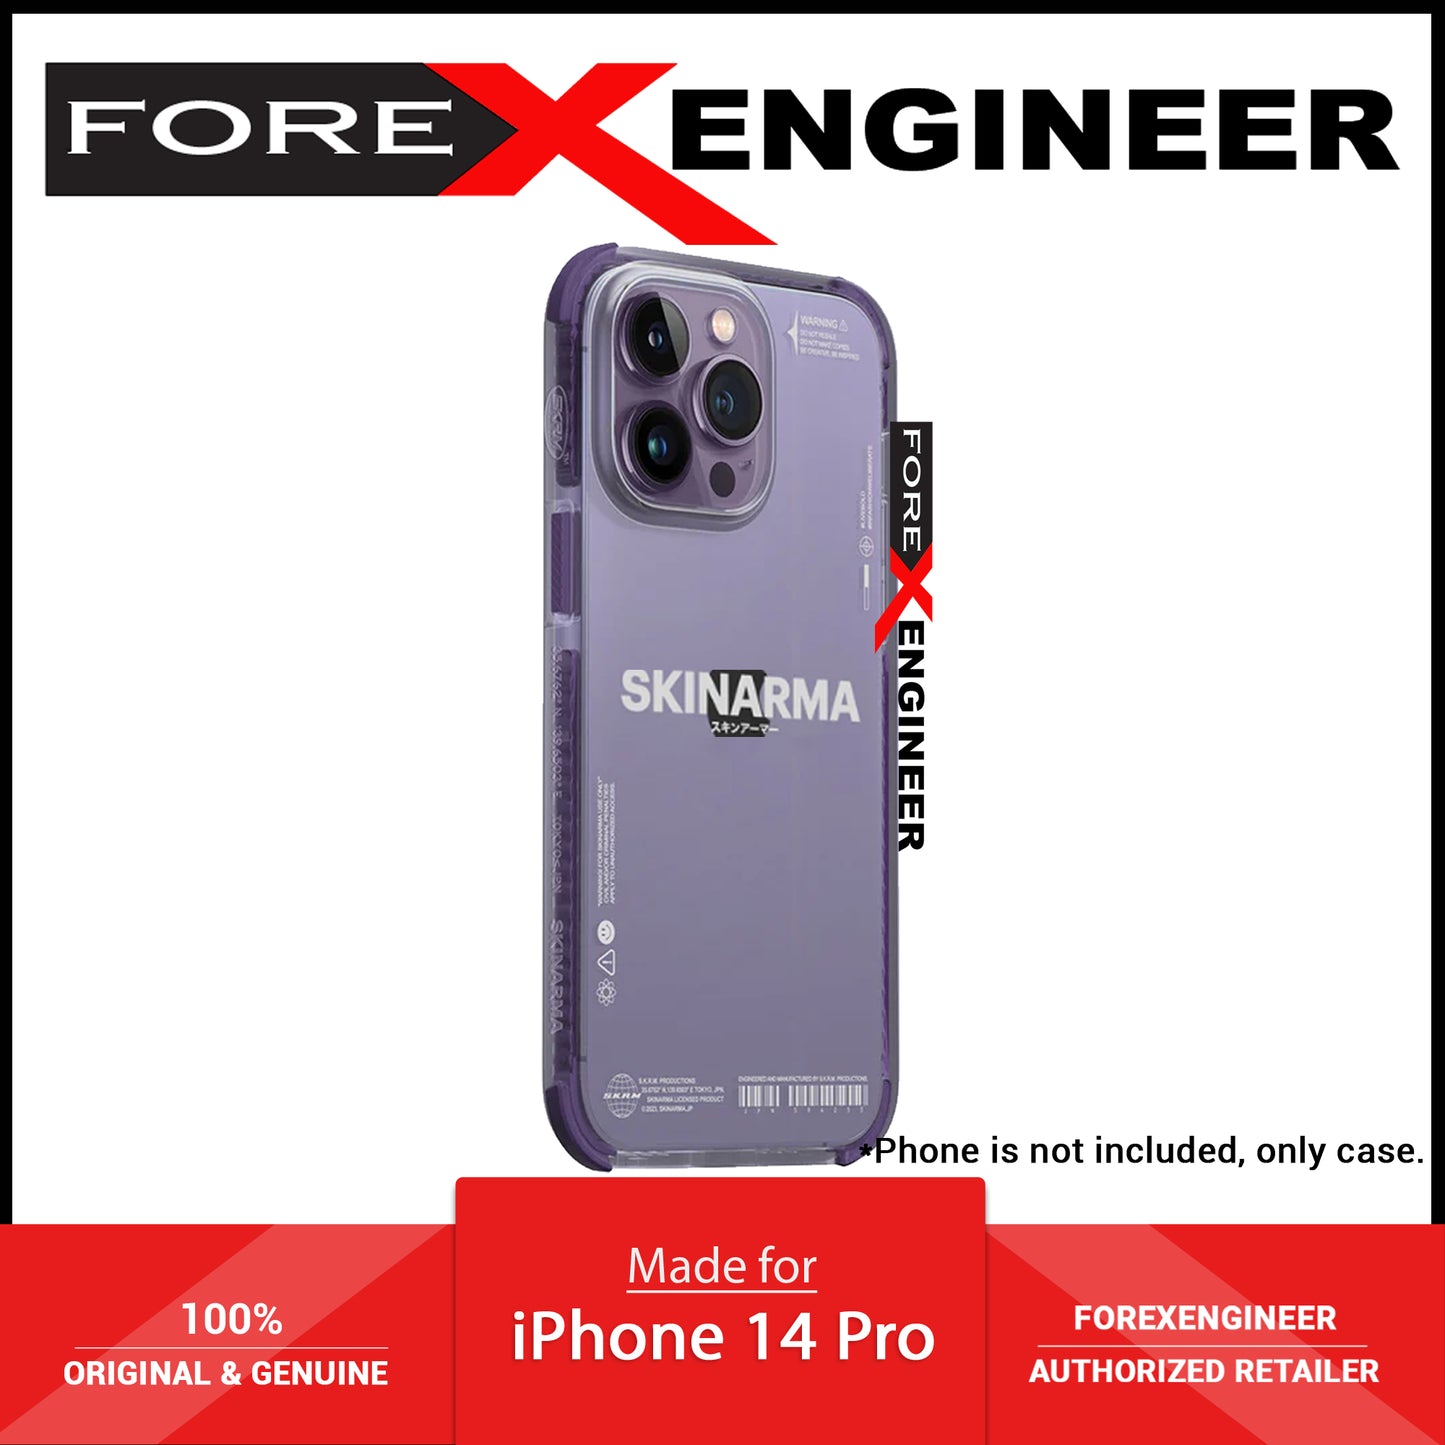 [ONLINE ONLY] Skinarma Iro for iPhone 14 Pro - Purple ( Barcode: 8886461242768 )